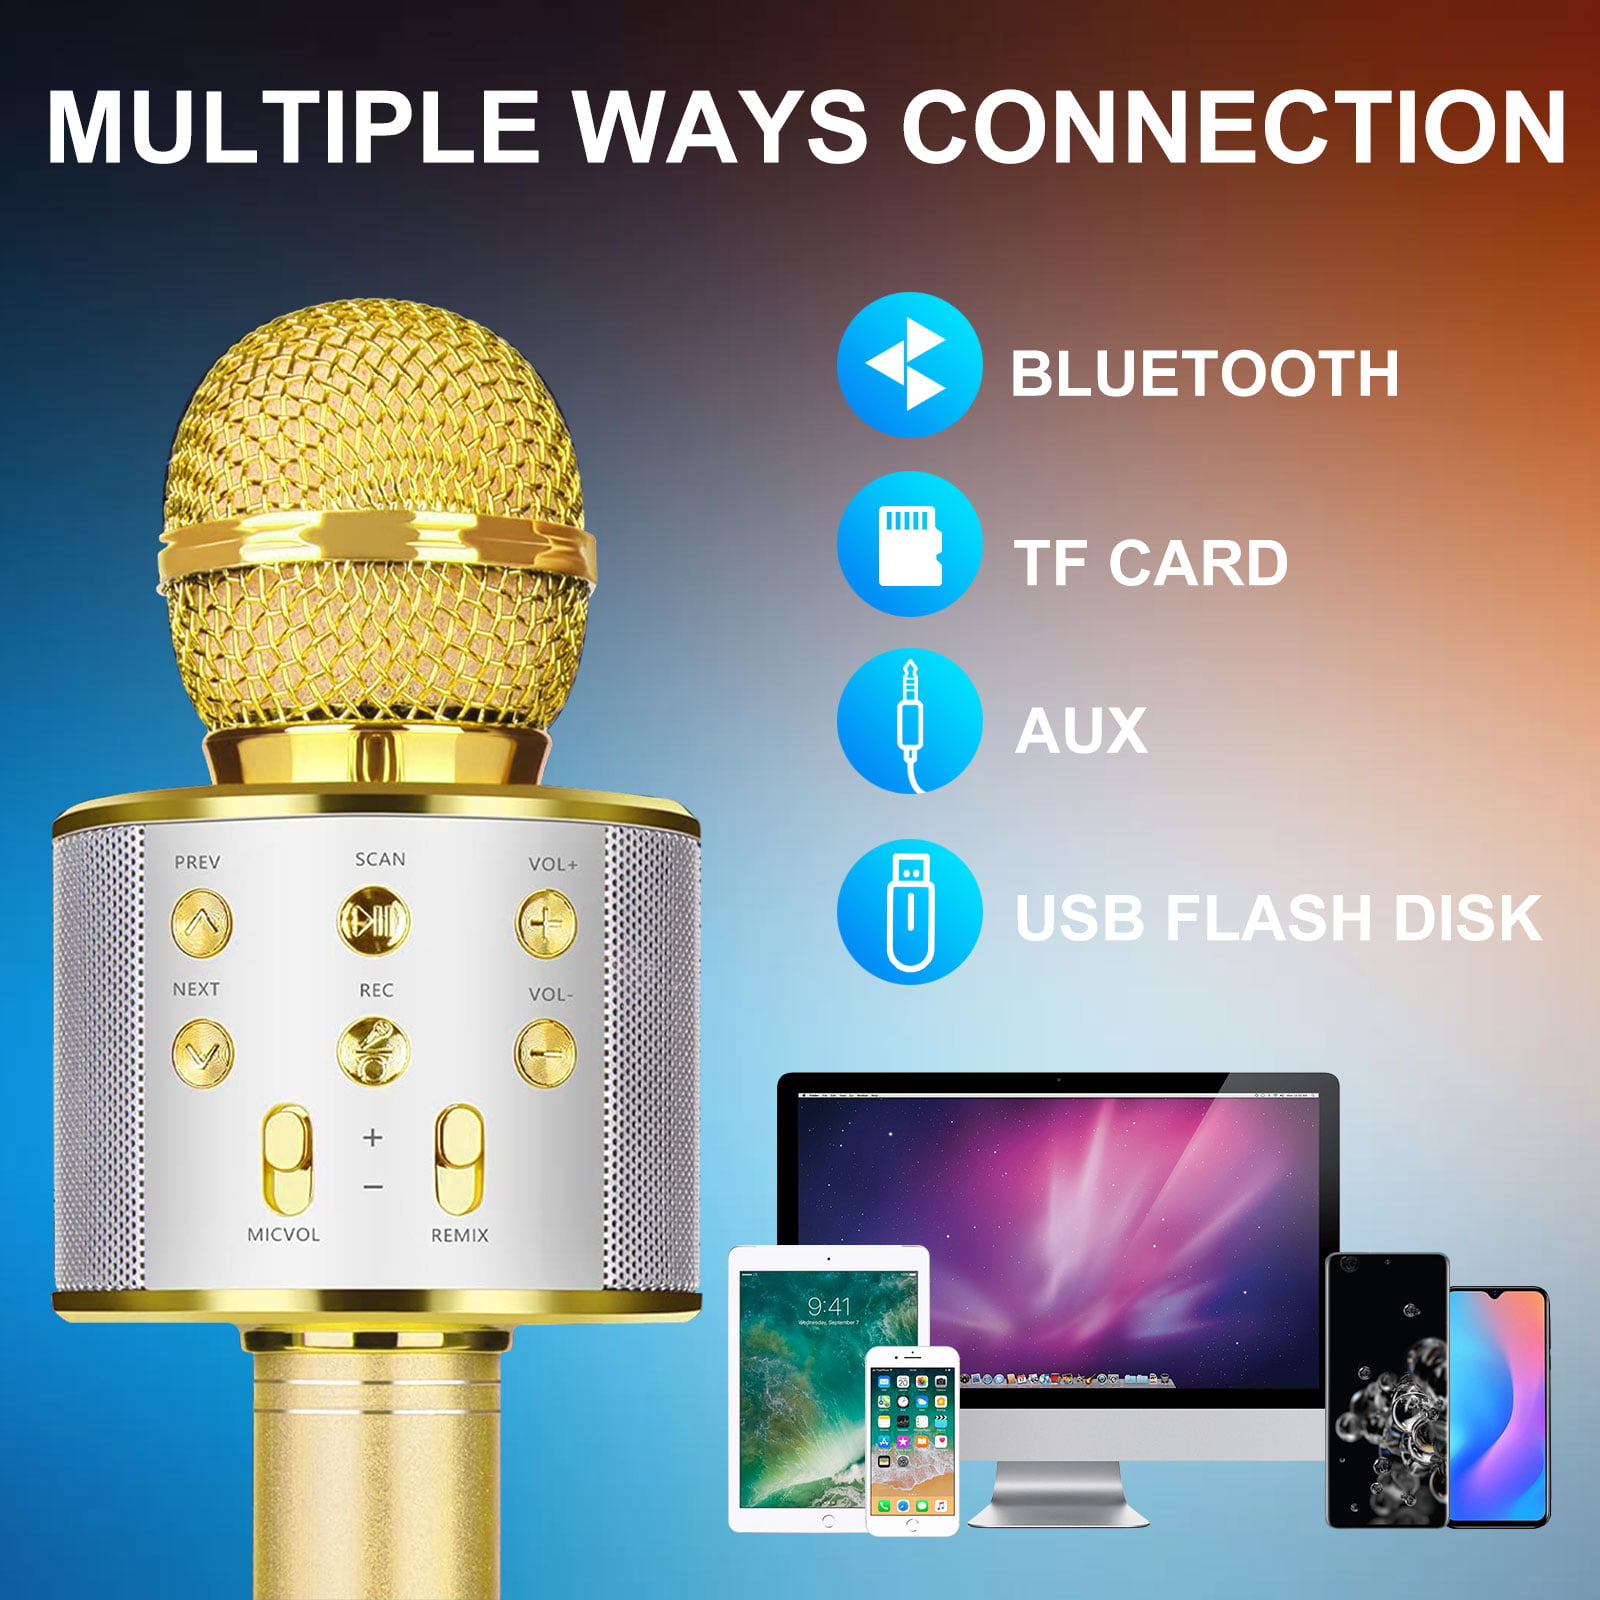 Wireless Portable Handheld Bluetooth Karaoke Microphone for Kids Birthday Present Stocking Fillers Stocking Stuffers AB02 Rose Gold 4-12 Year Old Boy Girls Gifts Toys 